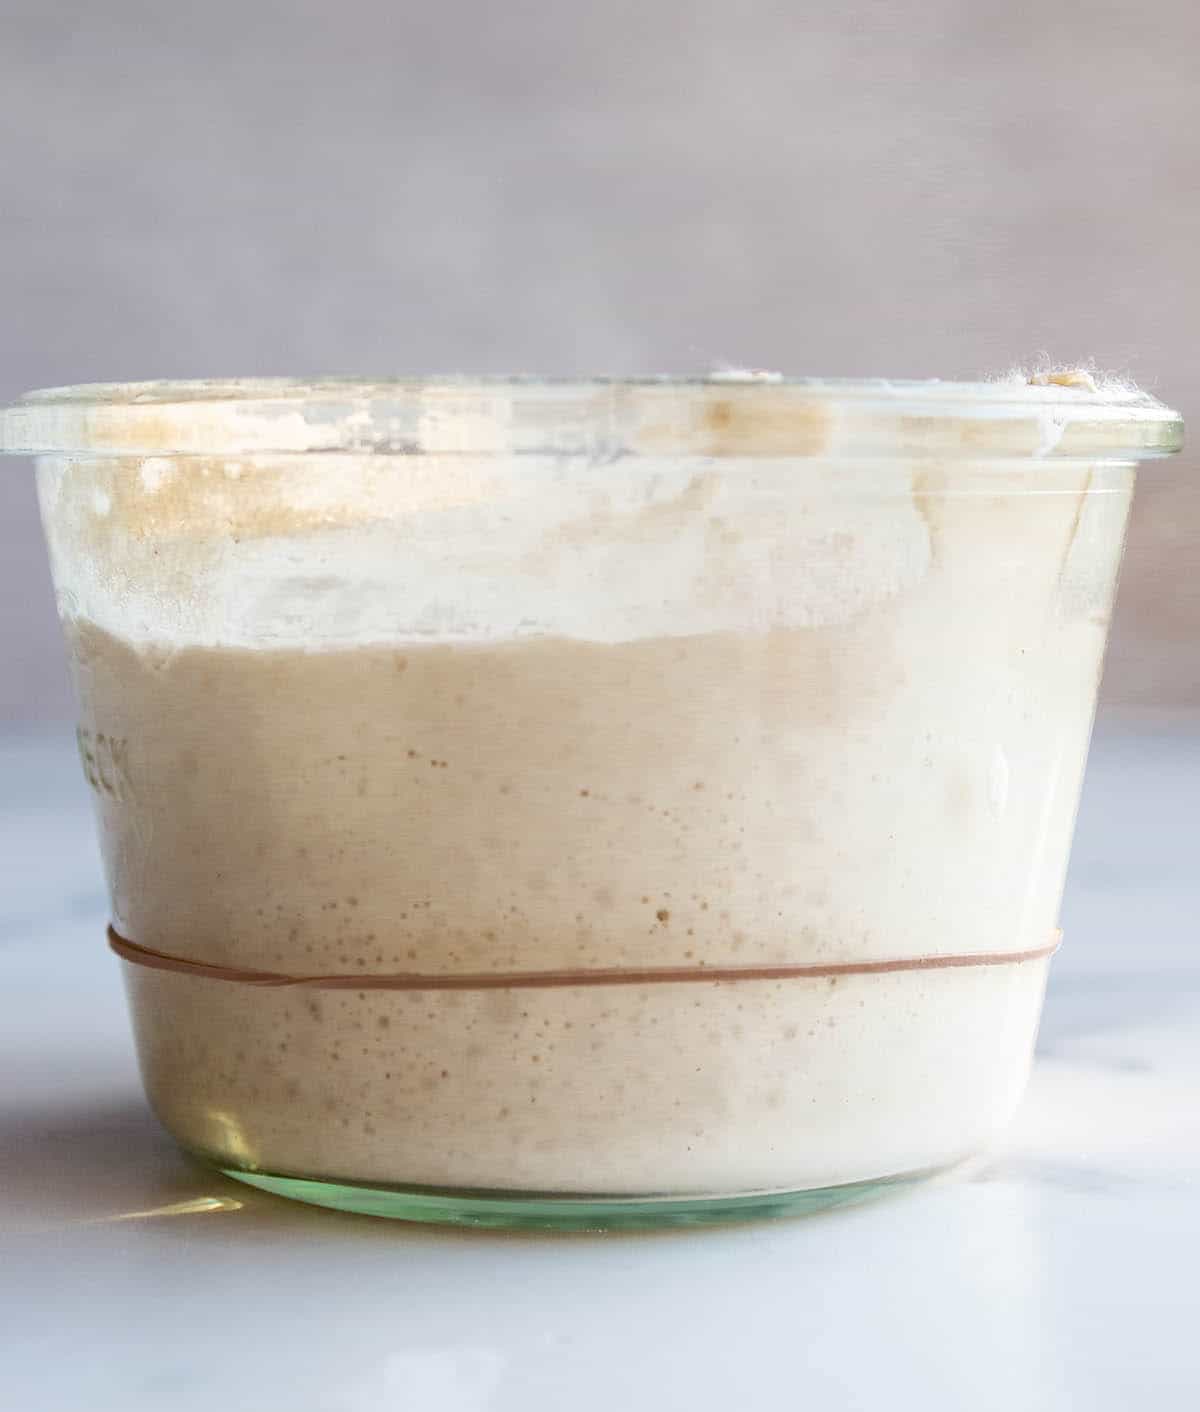 A jar with a sourdough starter that has risen above a rubber band.